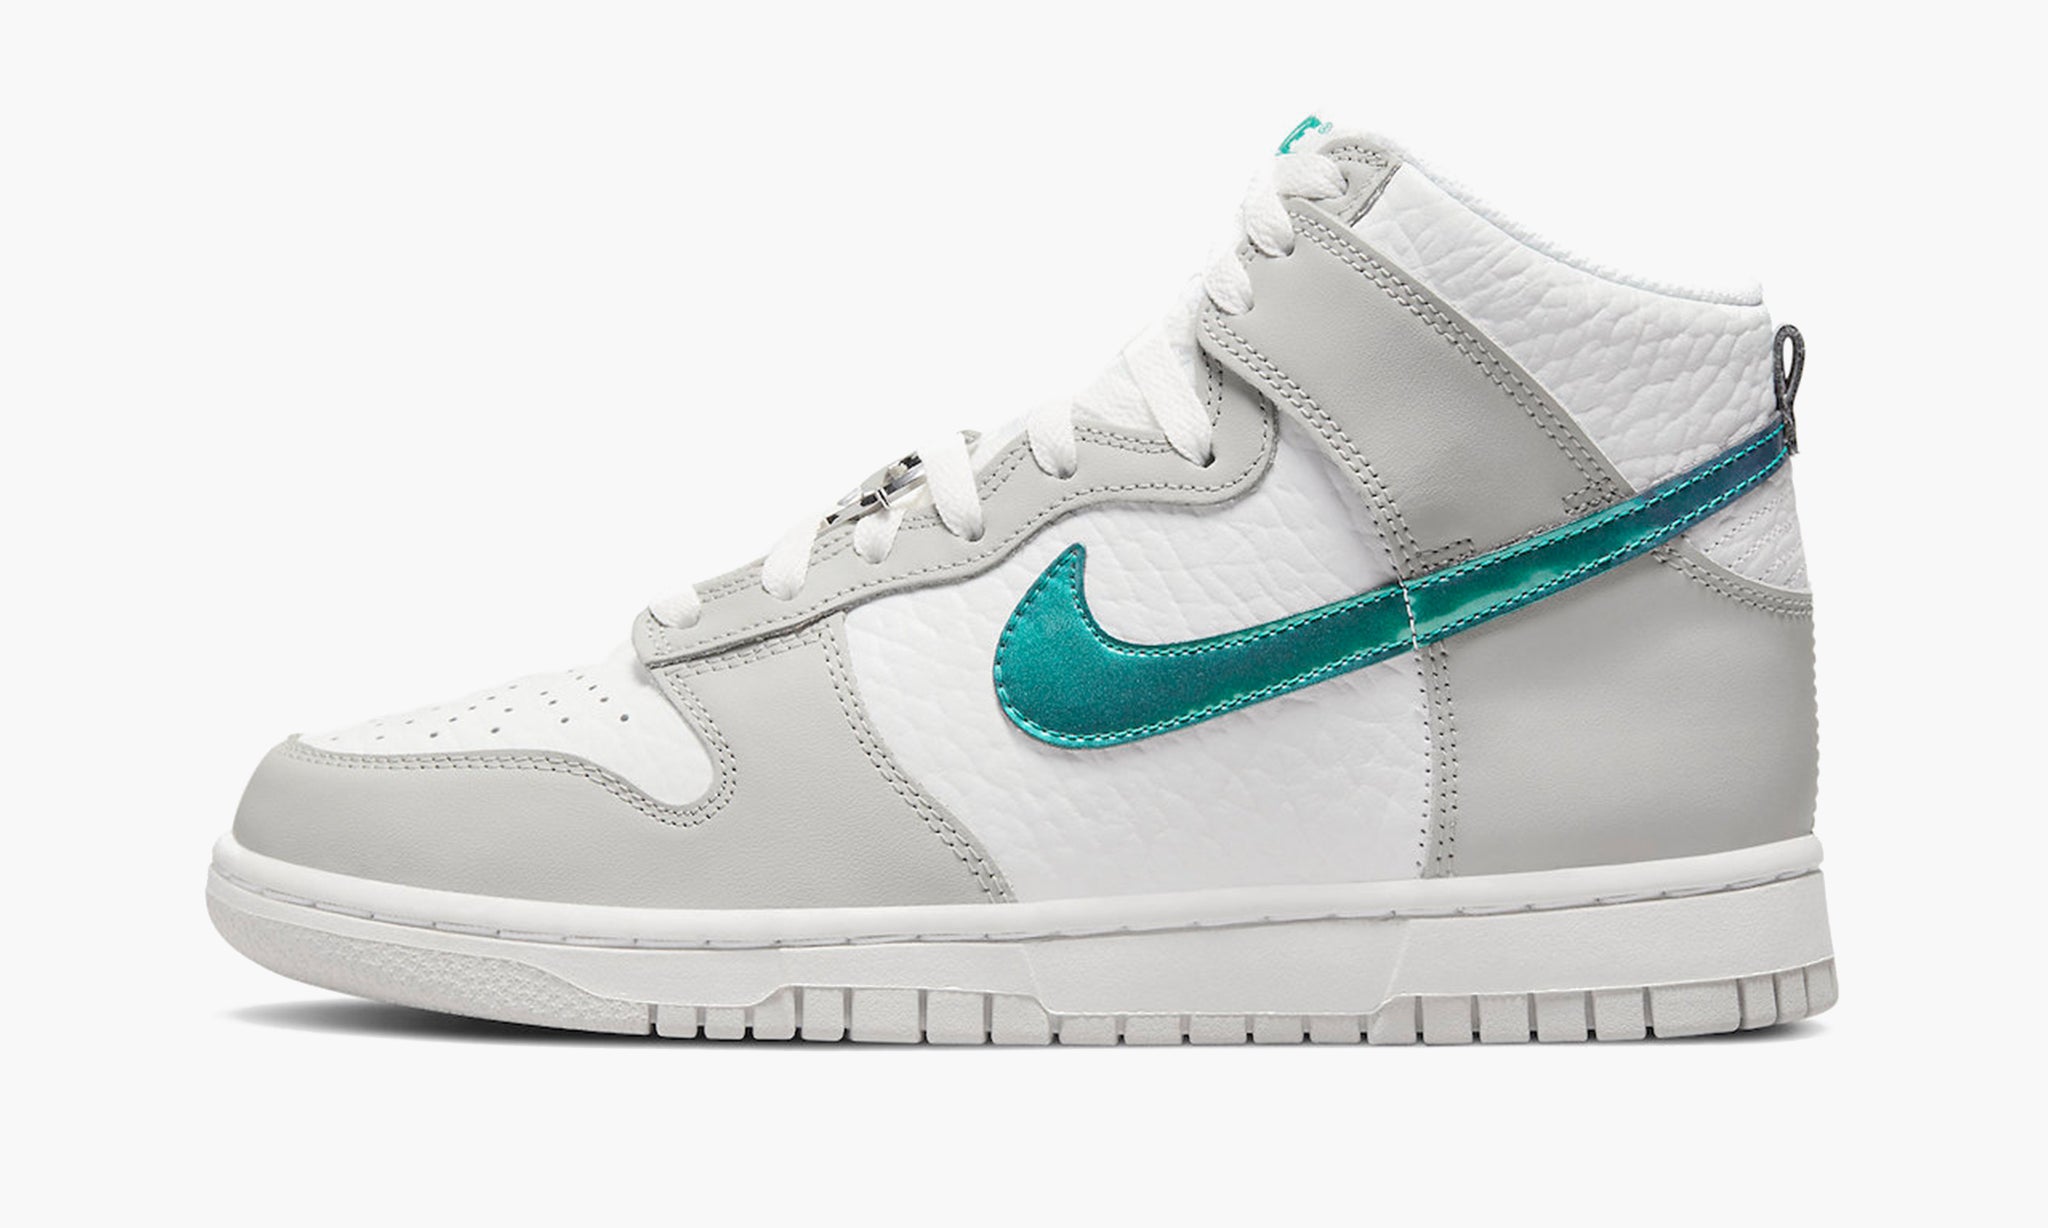 Nike Dunk High White Grey Turquoise (WMNS)